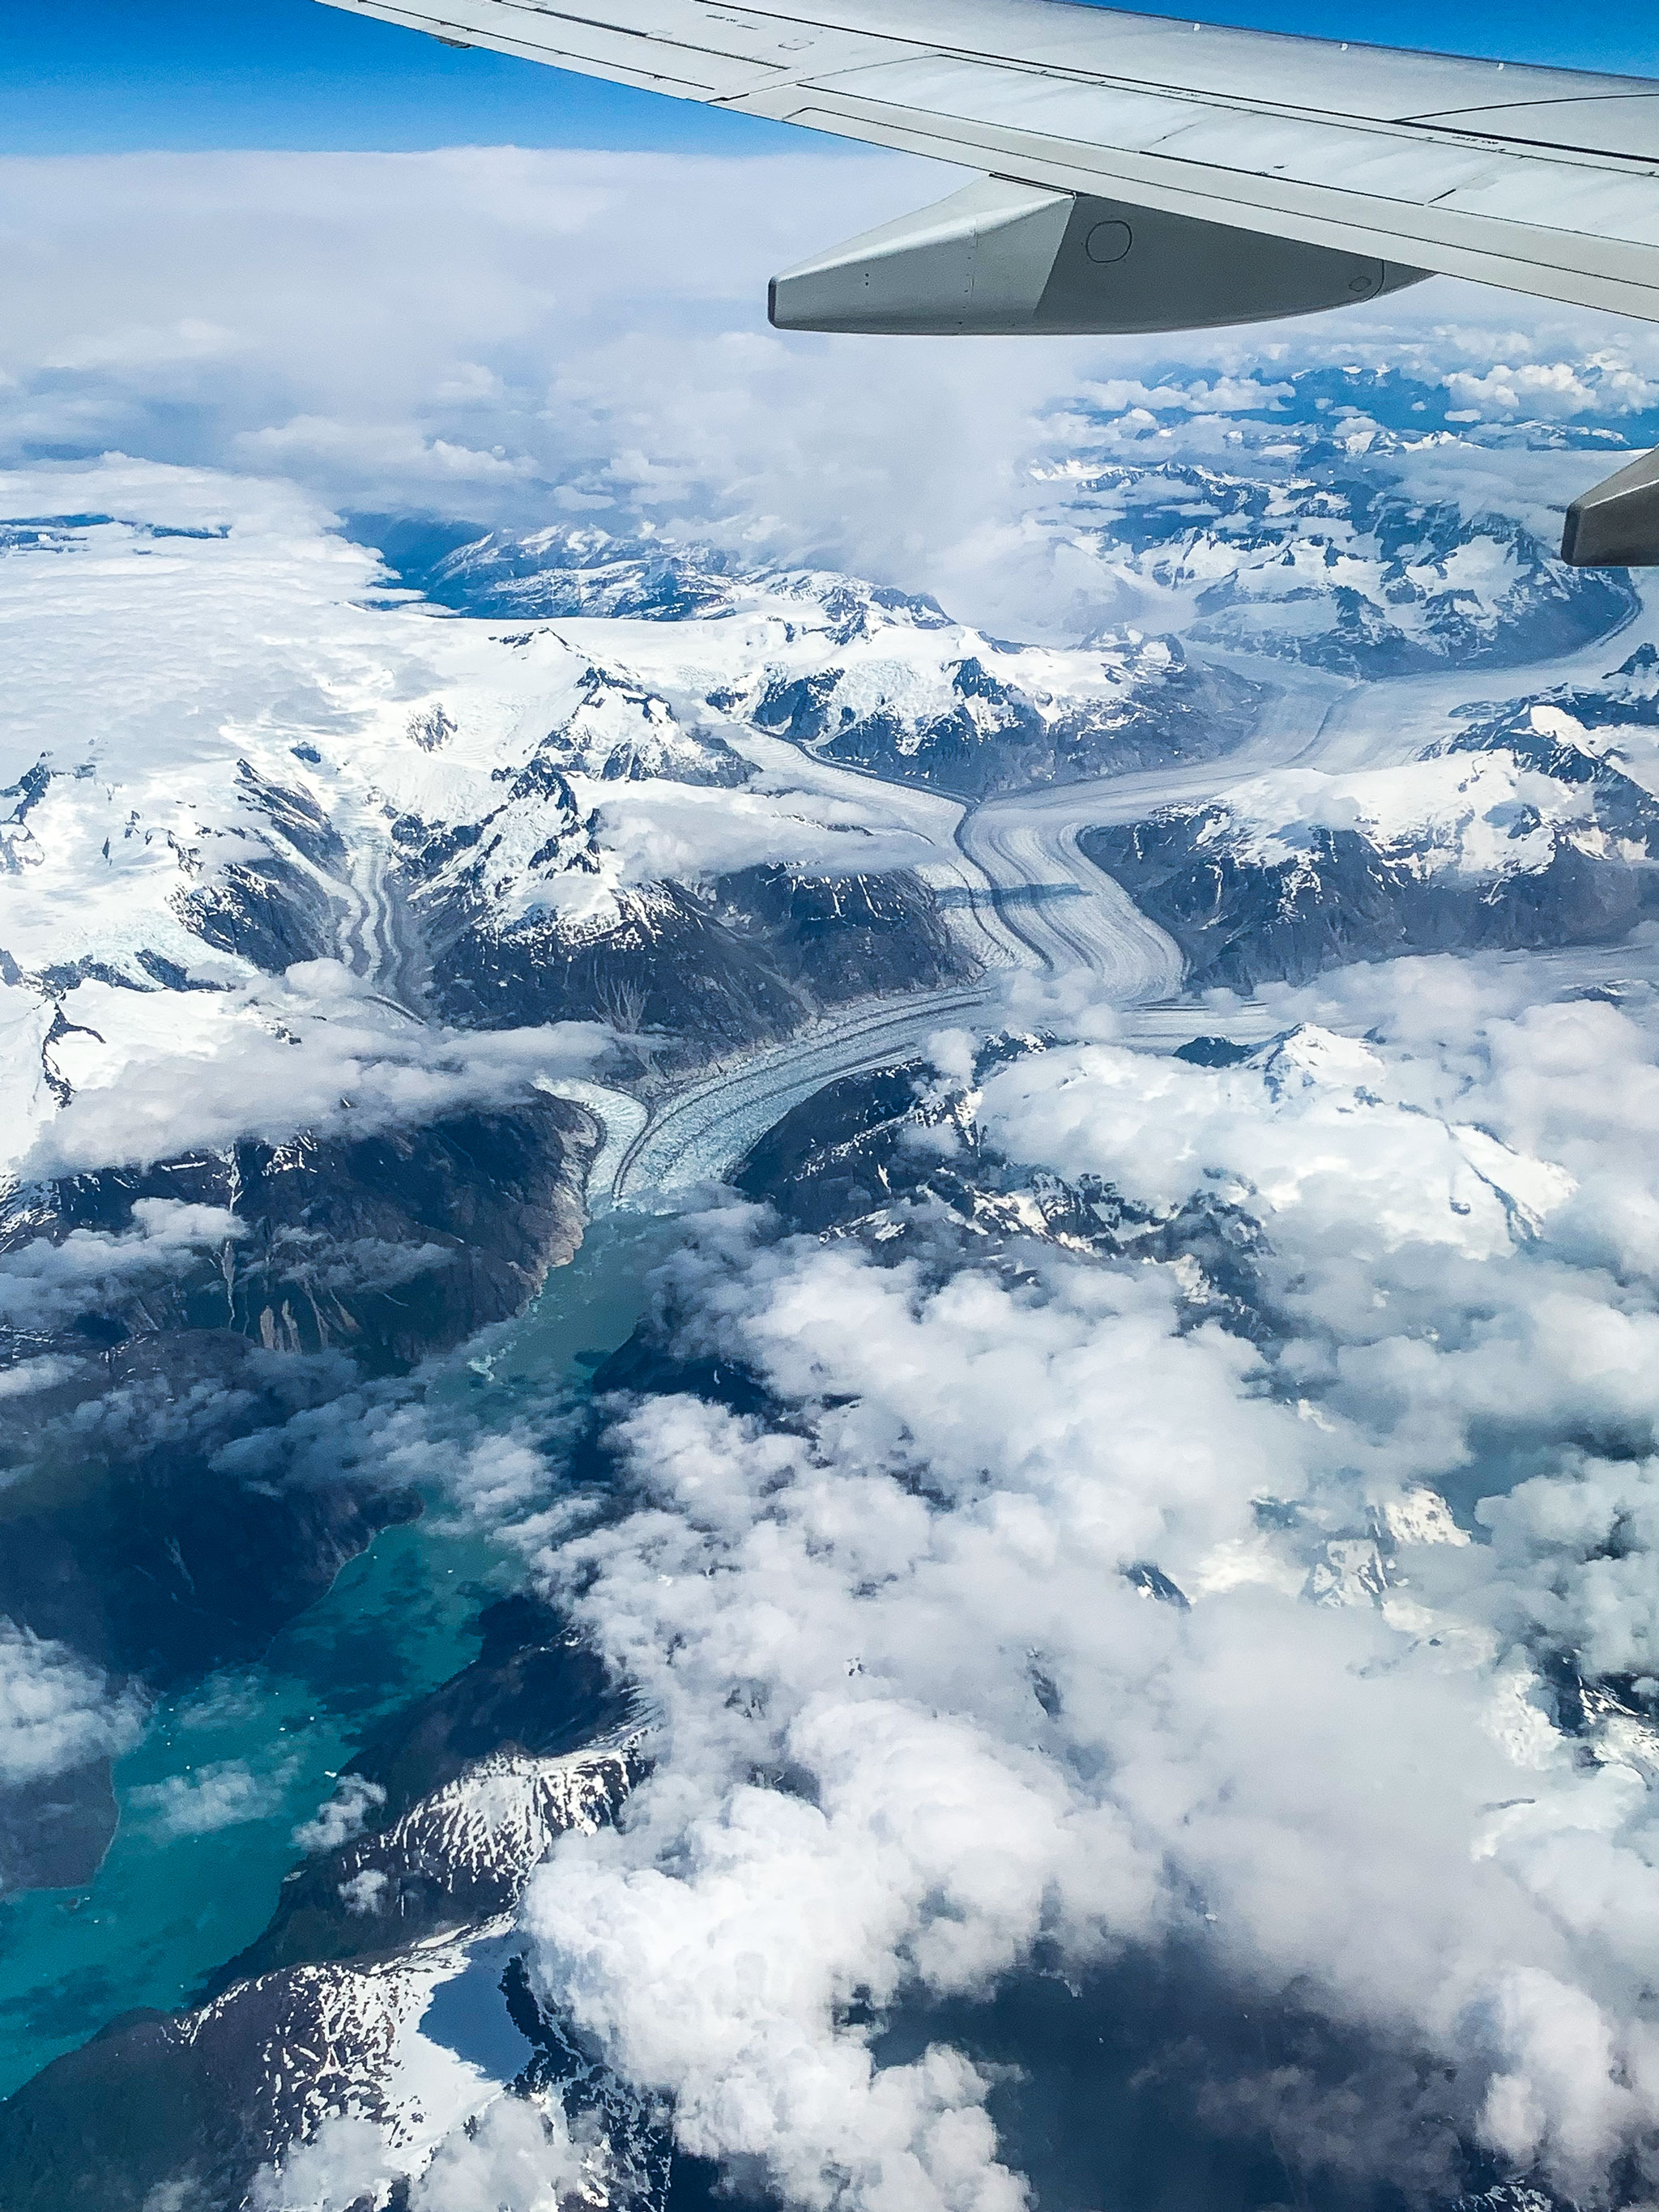 glaciers and glacier valleys in alaska from the plane